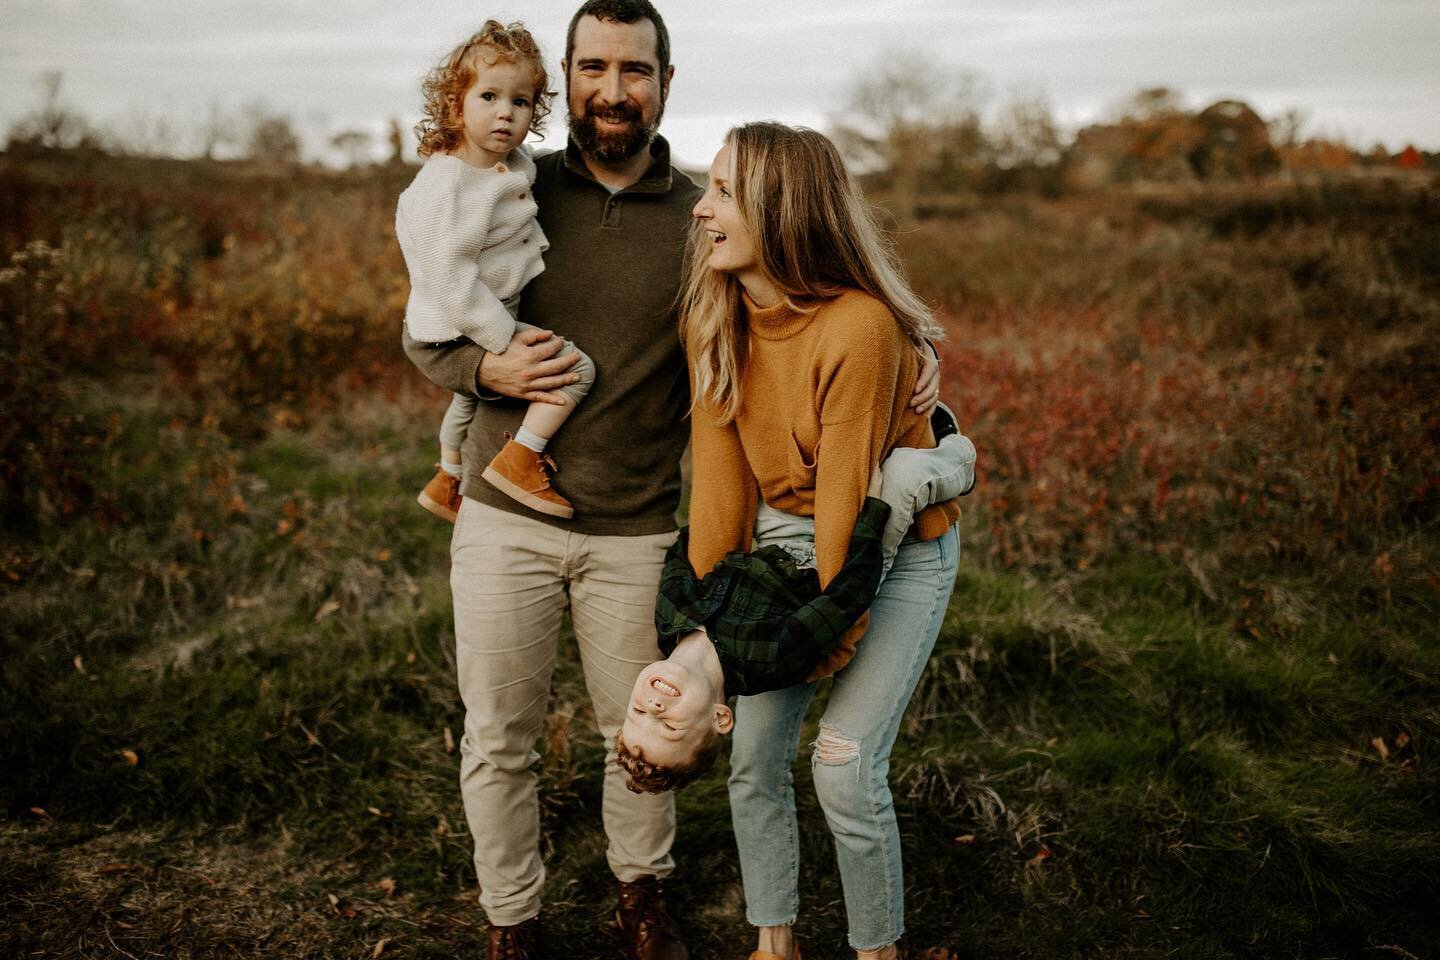 In a time prior to all three of these humans being in my life, the holidays had lost that &ldquo;magical&rdquo; feeling. I would have preferred to take a long winter&rsquo;s nap through them and wake on January 1st. 

Now, I get to wear matching holi